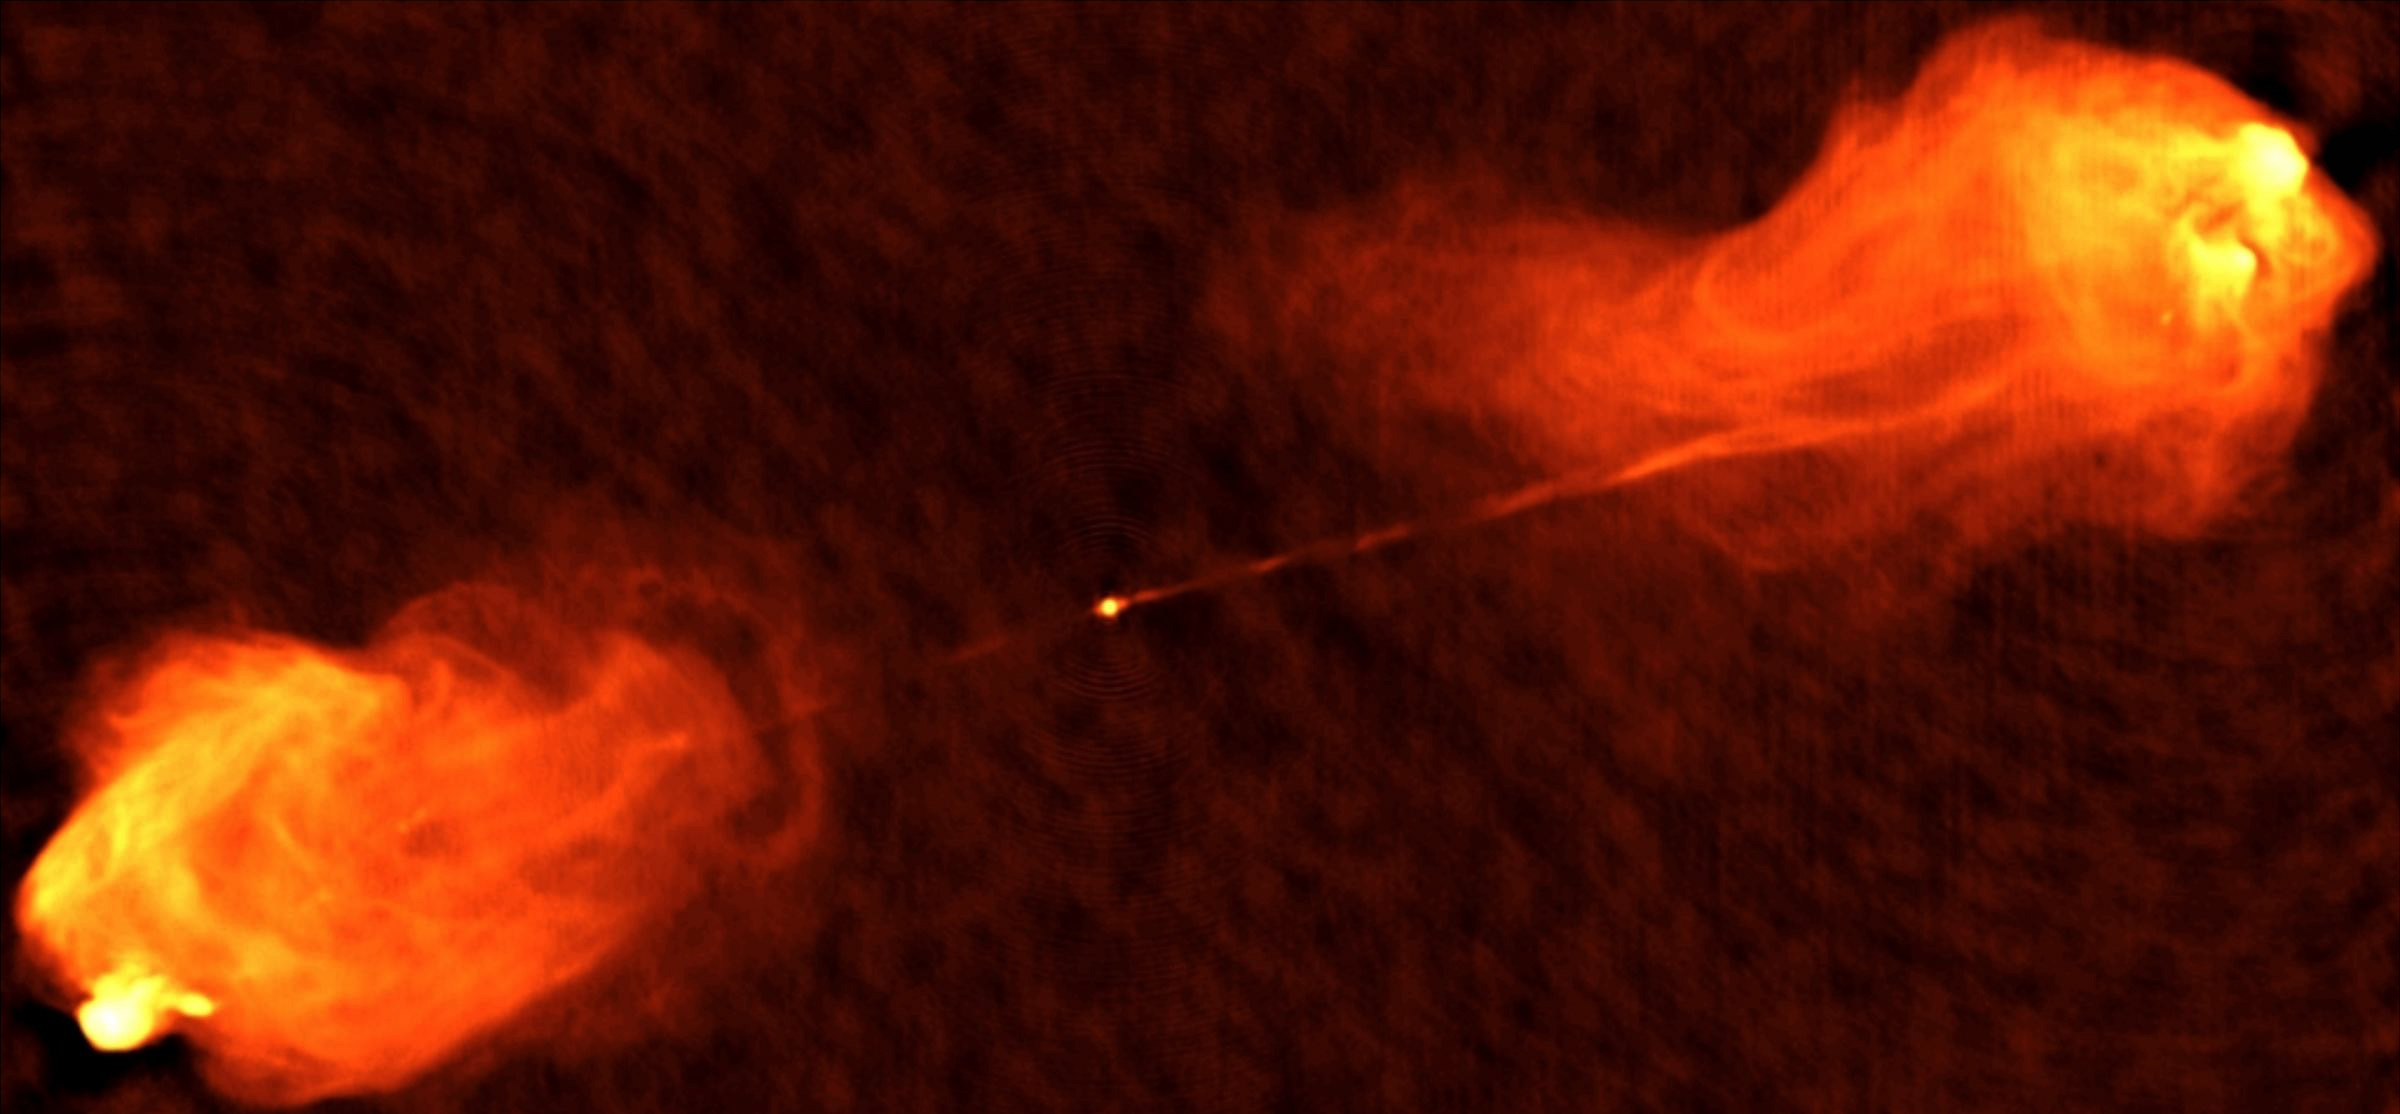 Radio data from the National Science Foundation's Very Large Array facility was used to construct this image of Cygnus A, the brightest radio source in the sky outside our galaxy.